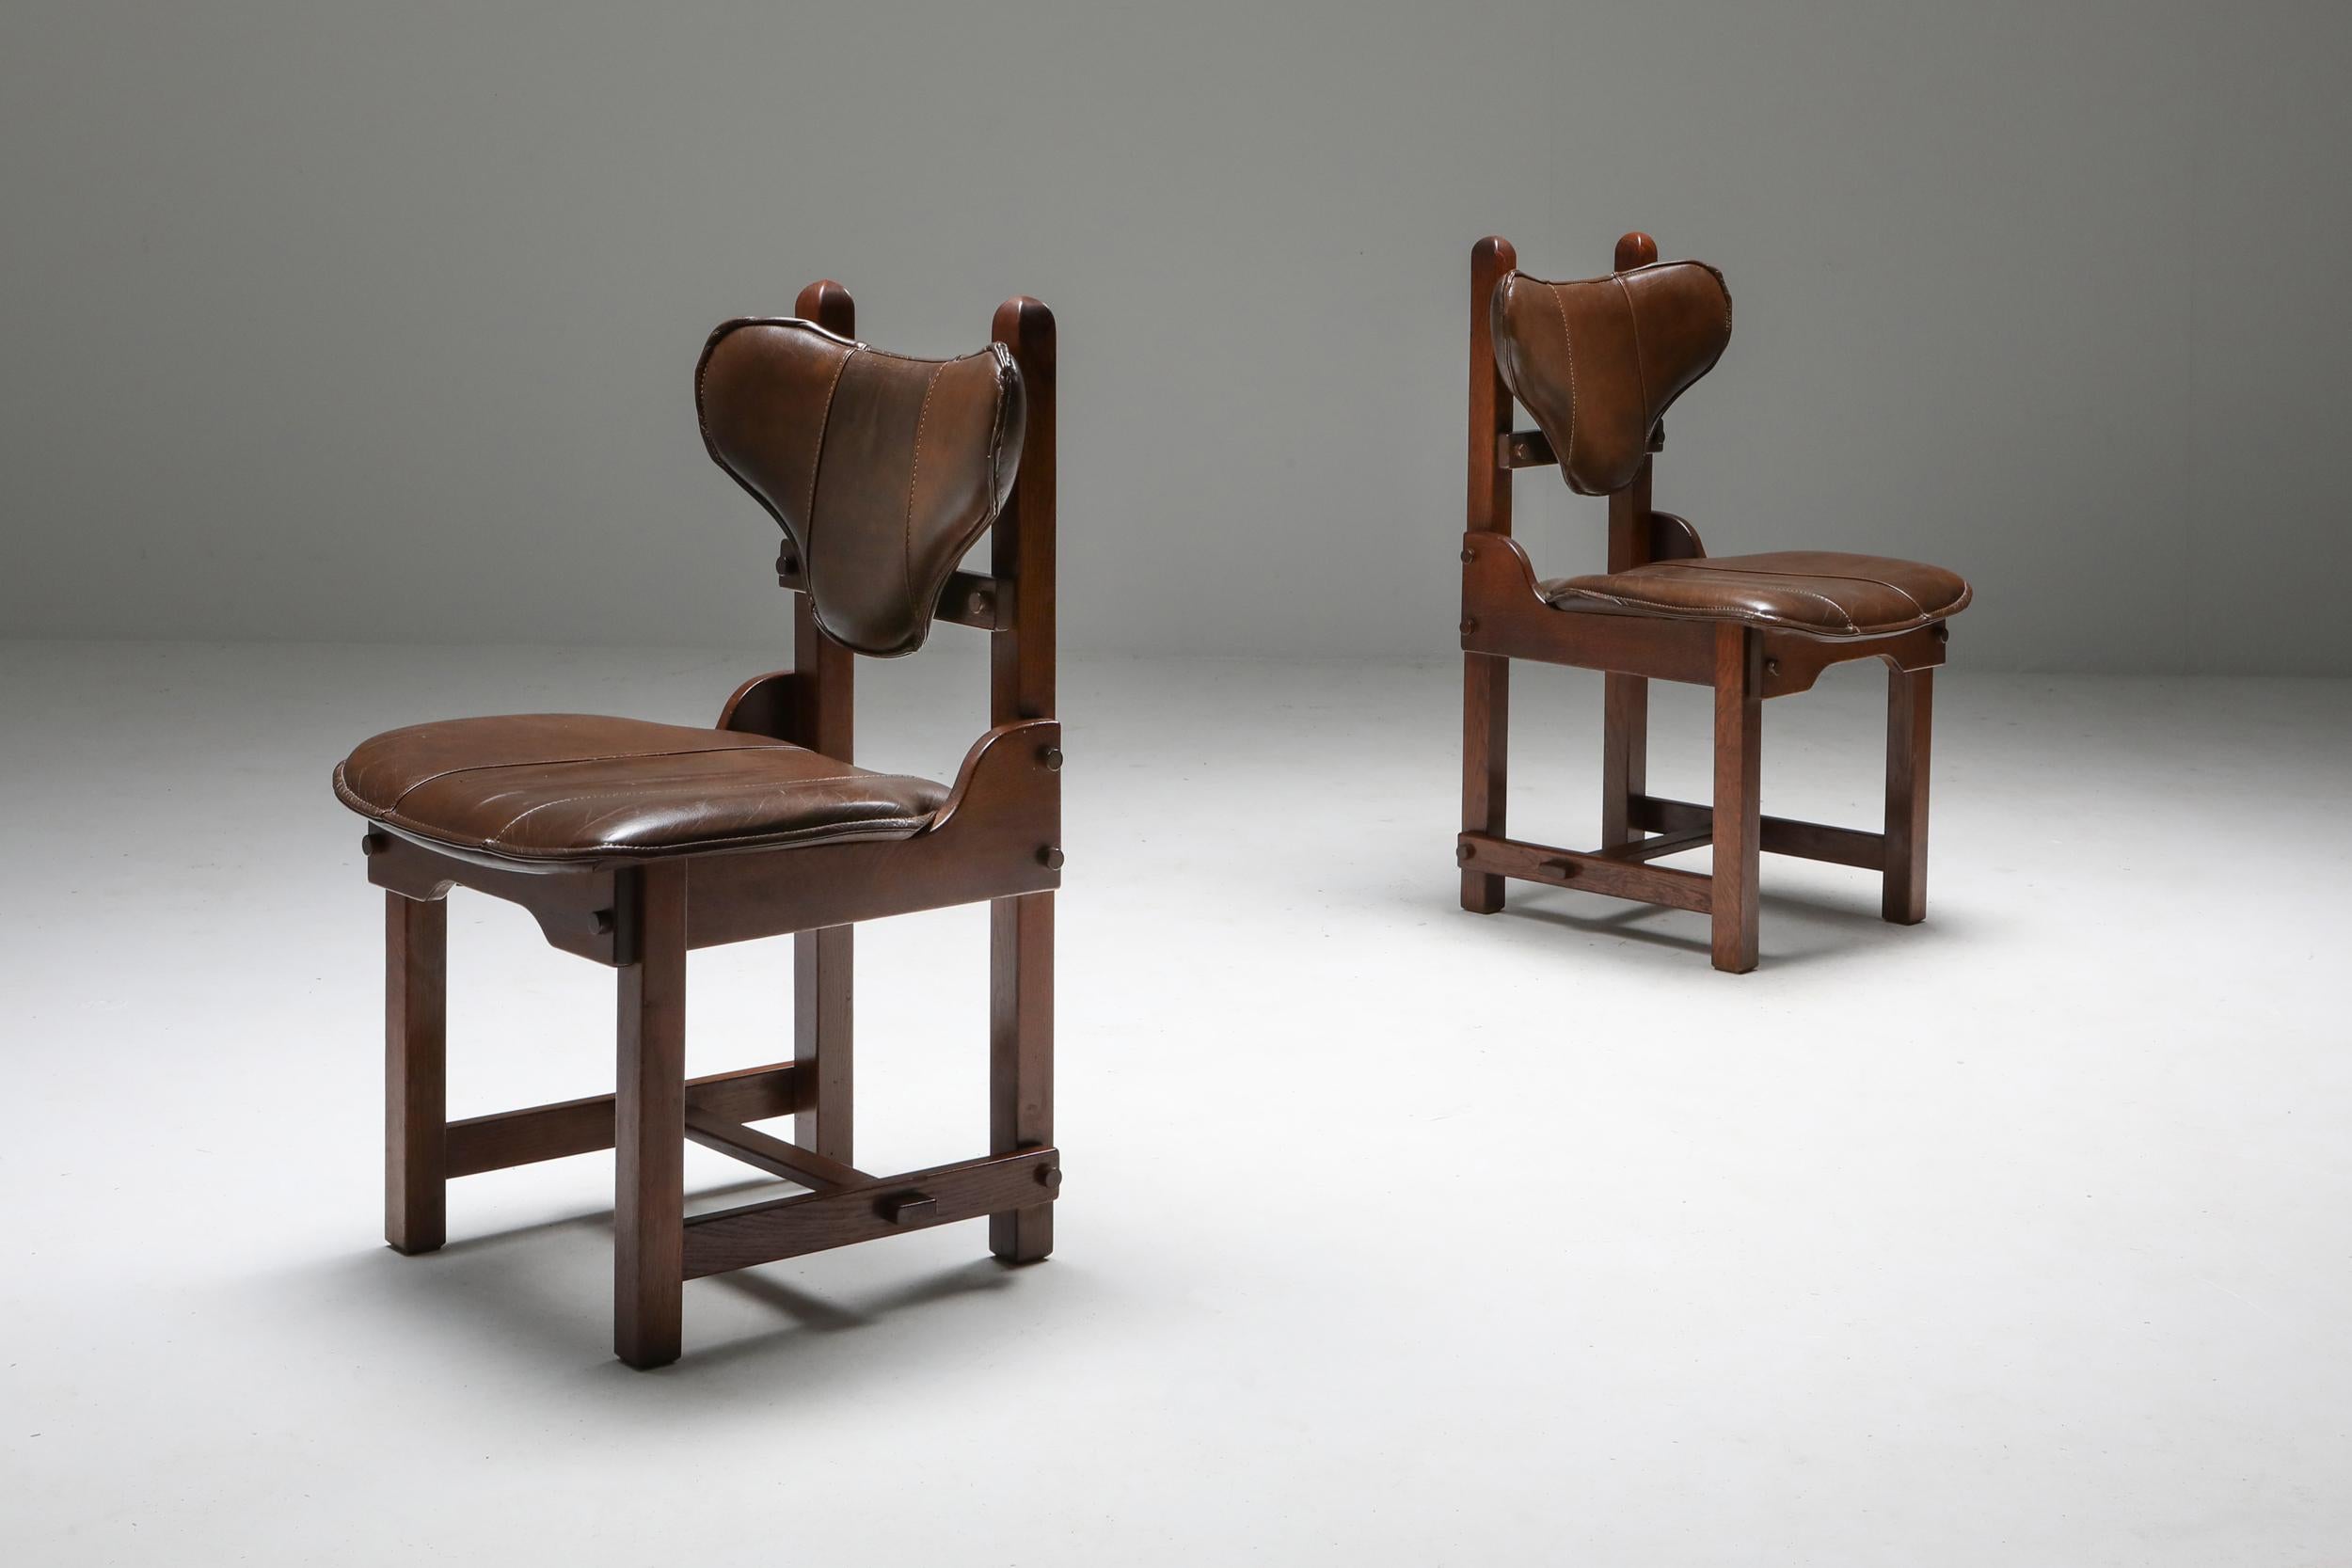 Belgian Oak and Leather Brutalist Chairs, Belgium, 1970s